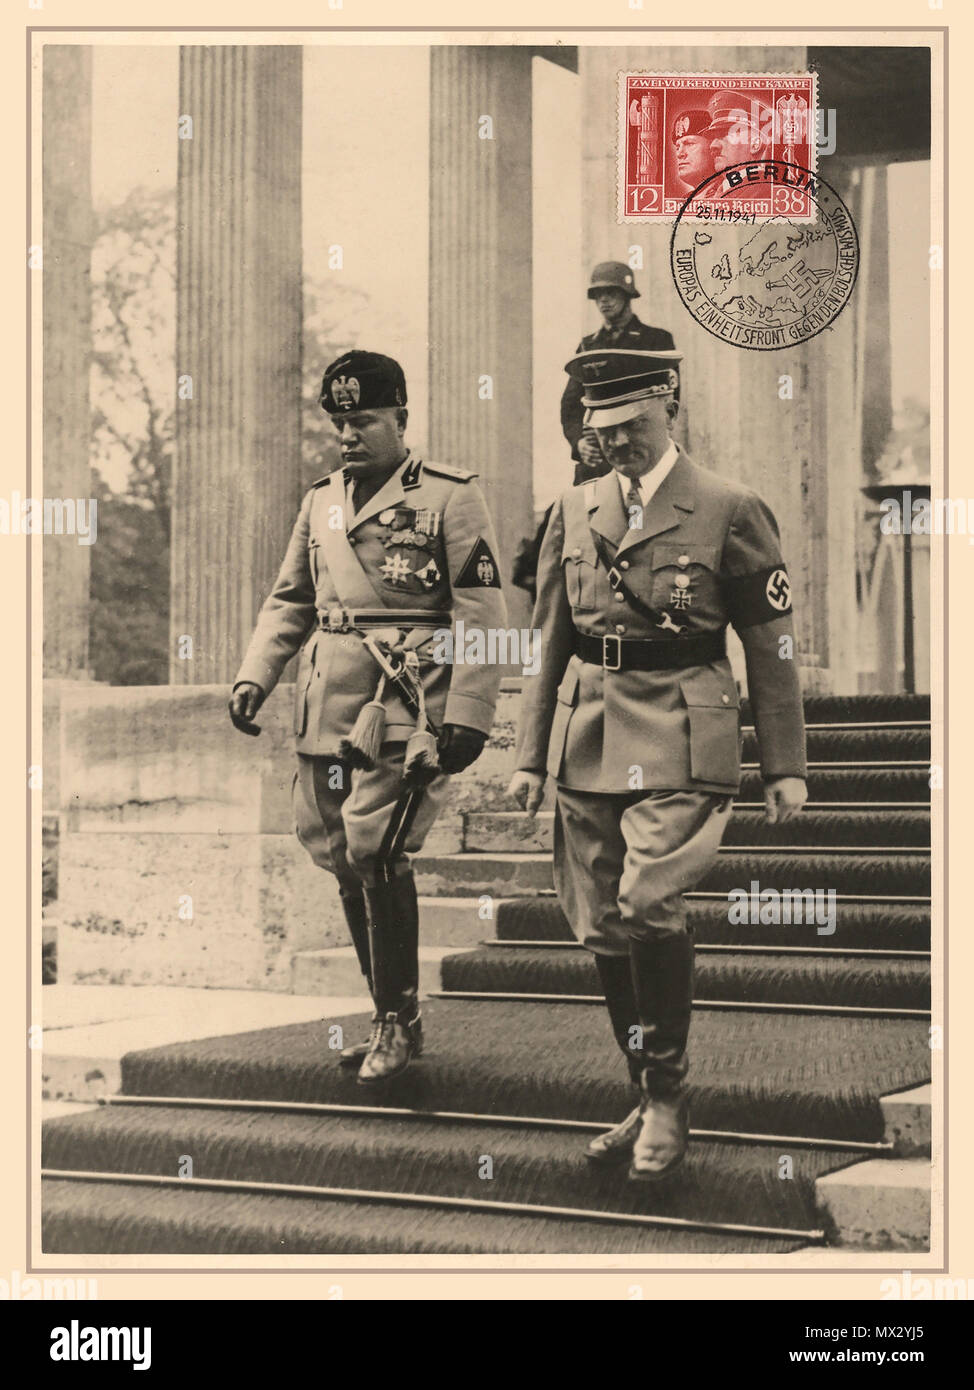 HITLER MUSSOLINI BERLIN 1938 Vintage Political Propaganda Postcard 28th September 1937 Berlin Germany Italian leader and dictator Benito Mussolini with German Chancellor and Nazi leader Adolf Hitler Stock Photo